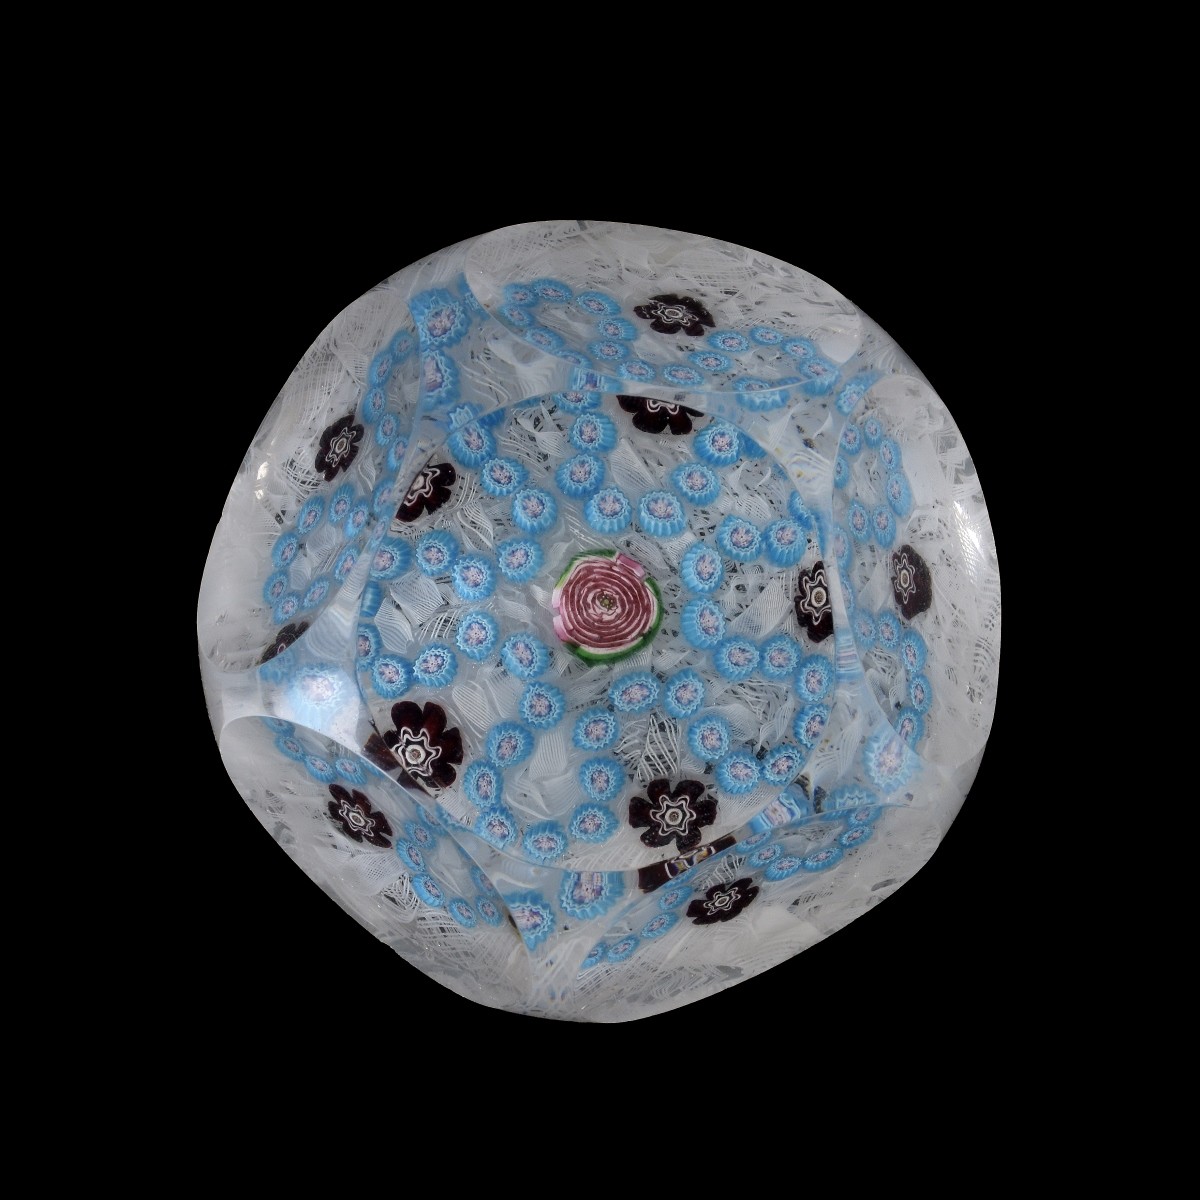 19th C. Clichy Paperweight